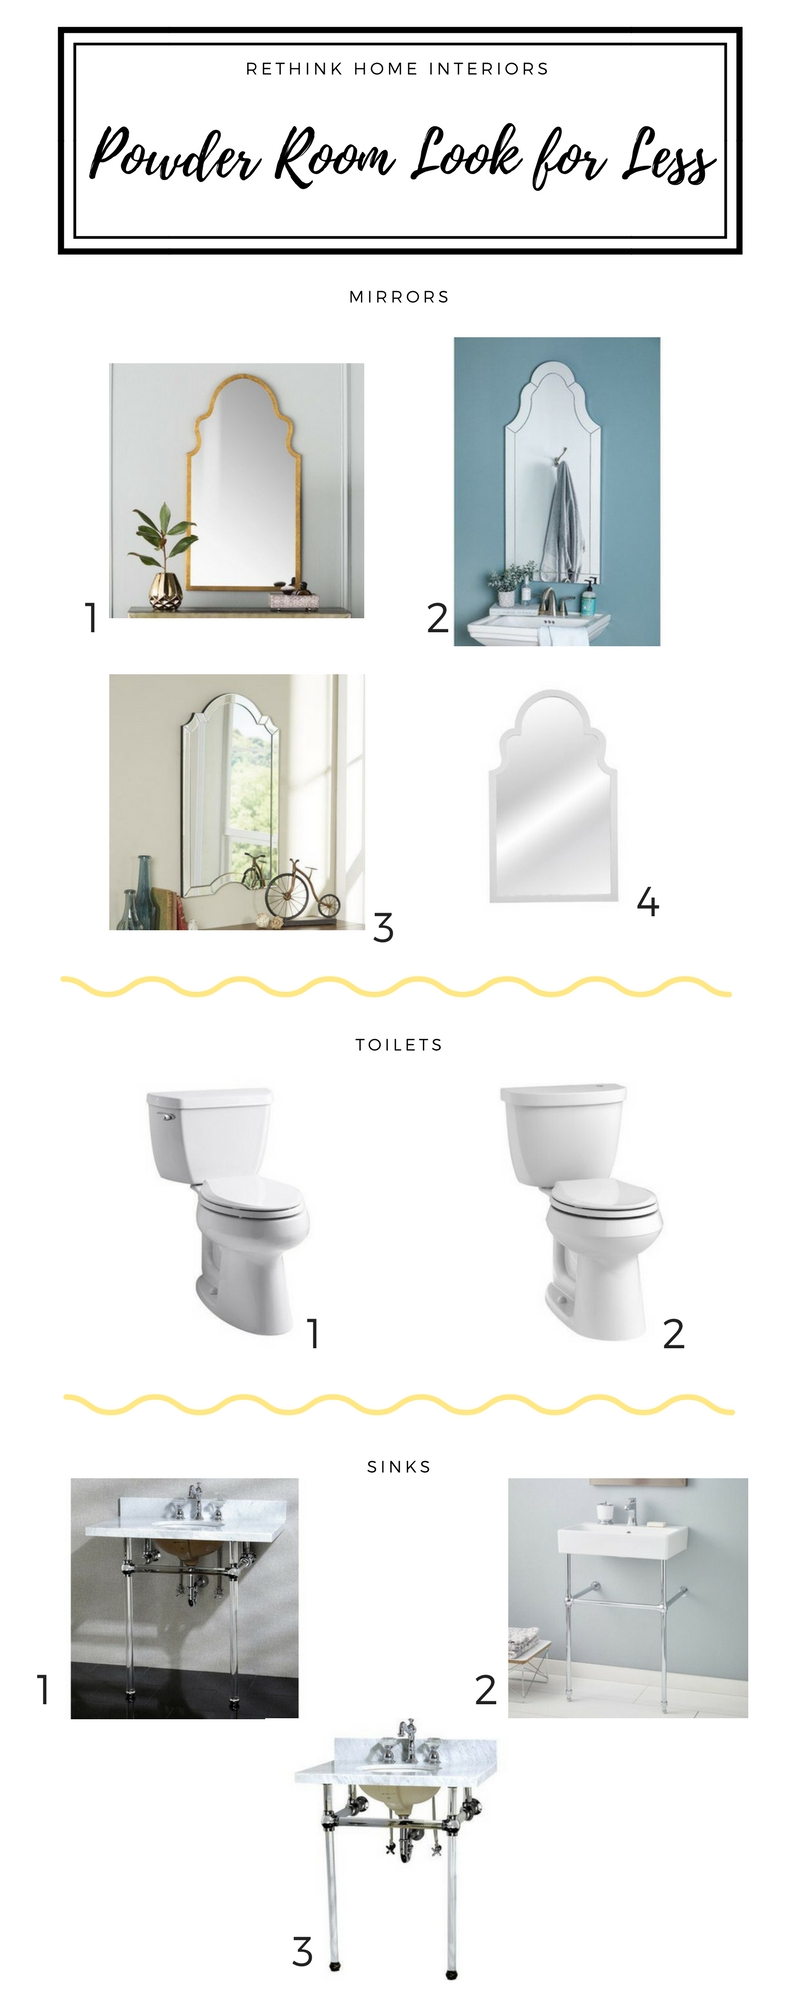 Powder-Room-Look-For-Less.-Designer-Look-mirrors-toilets-and-sinks-on-a-budget-for-Home-Staging-inspiration.-Rethink-Home-Interiors-Home-Staging-Montgomery-County-PA-by-Lori-Fischer